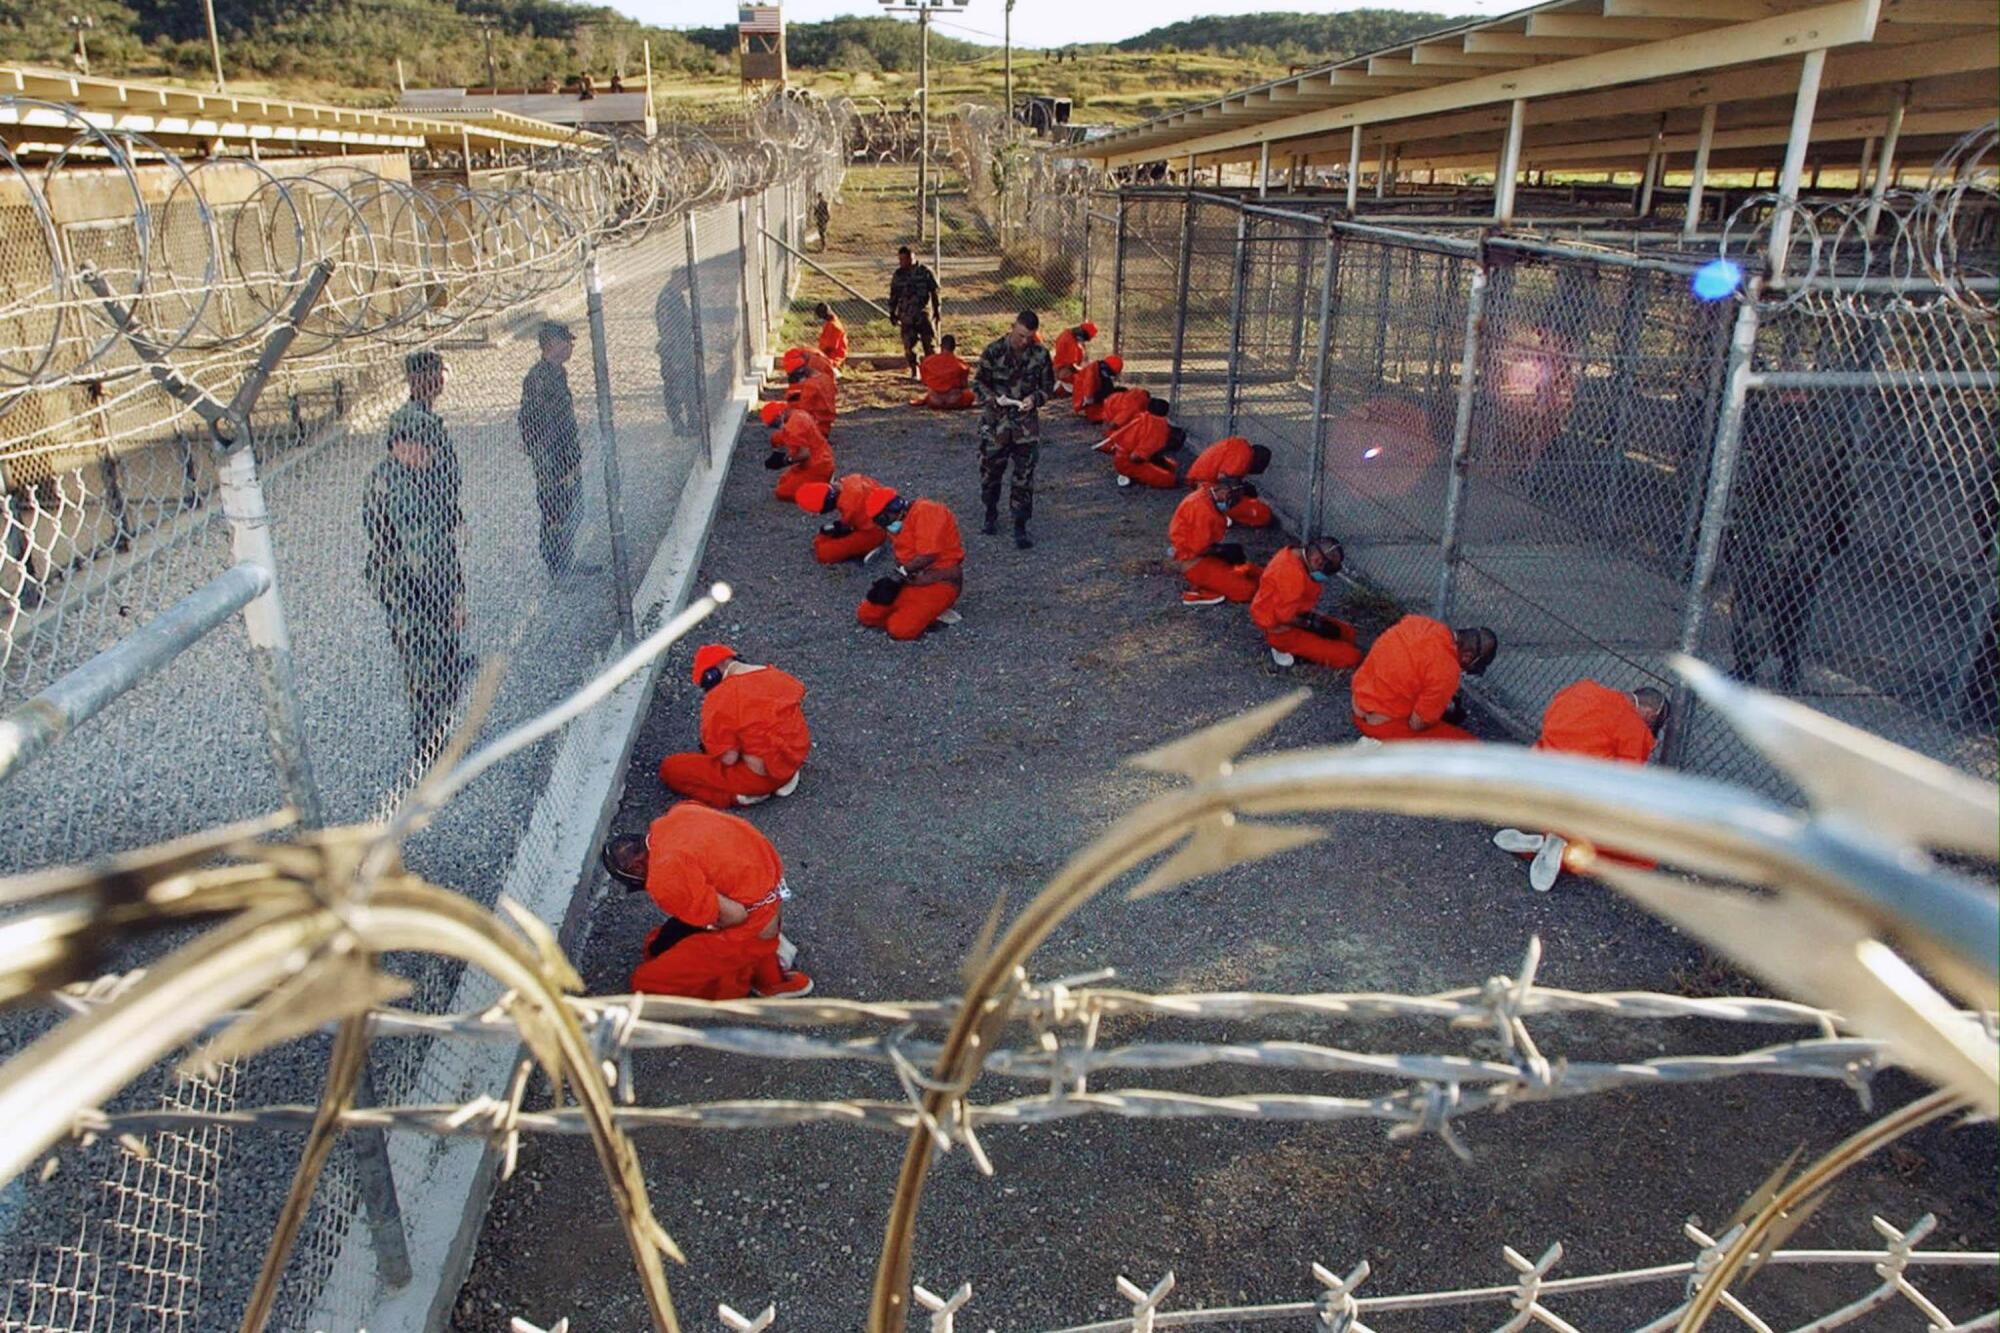 Two rows of men in orange jumpsuits sit in a fenced-off area, watched by men in military fatigues